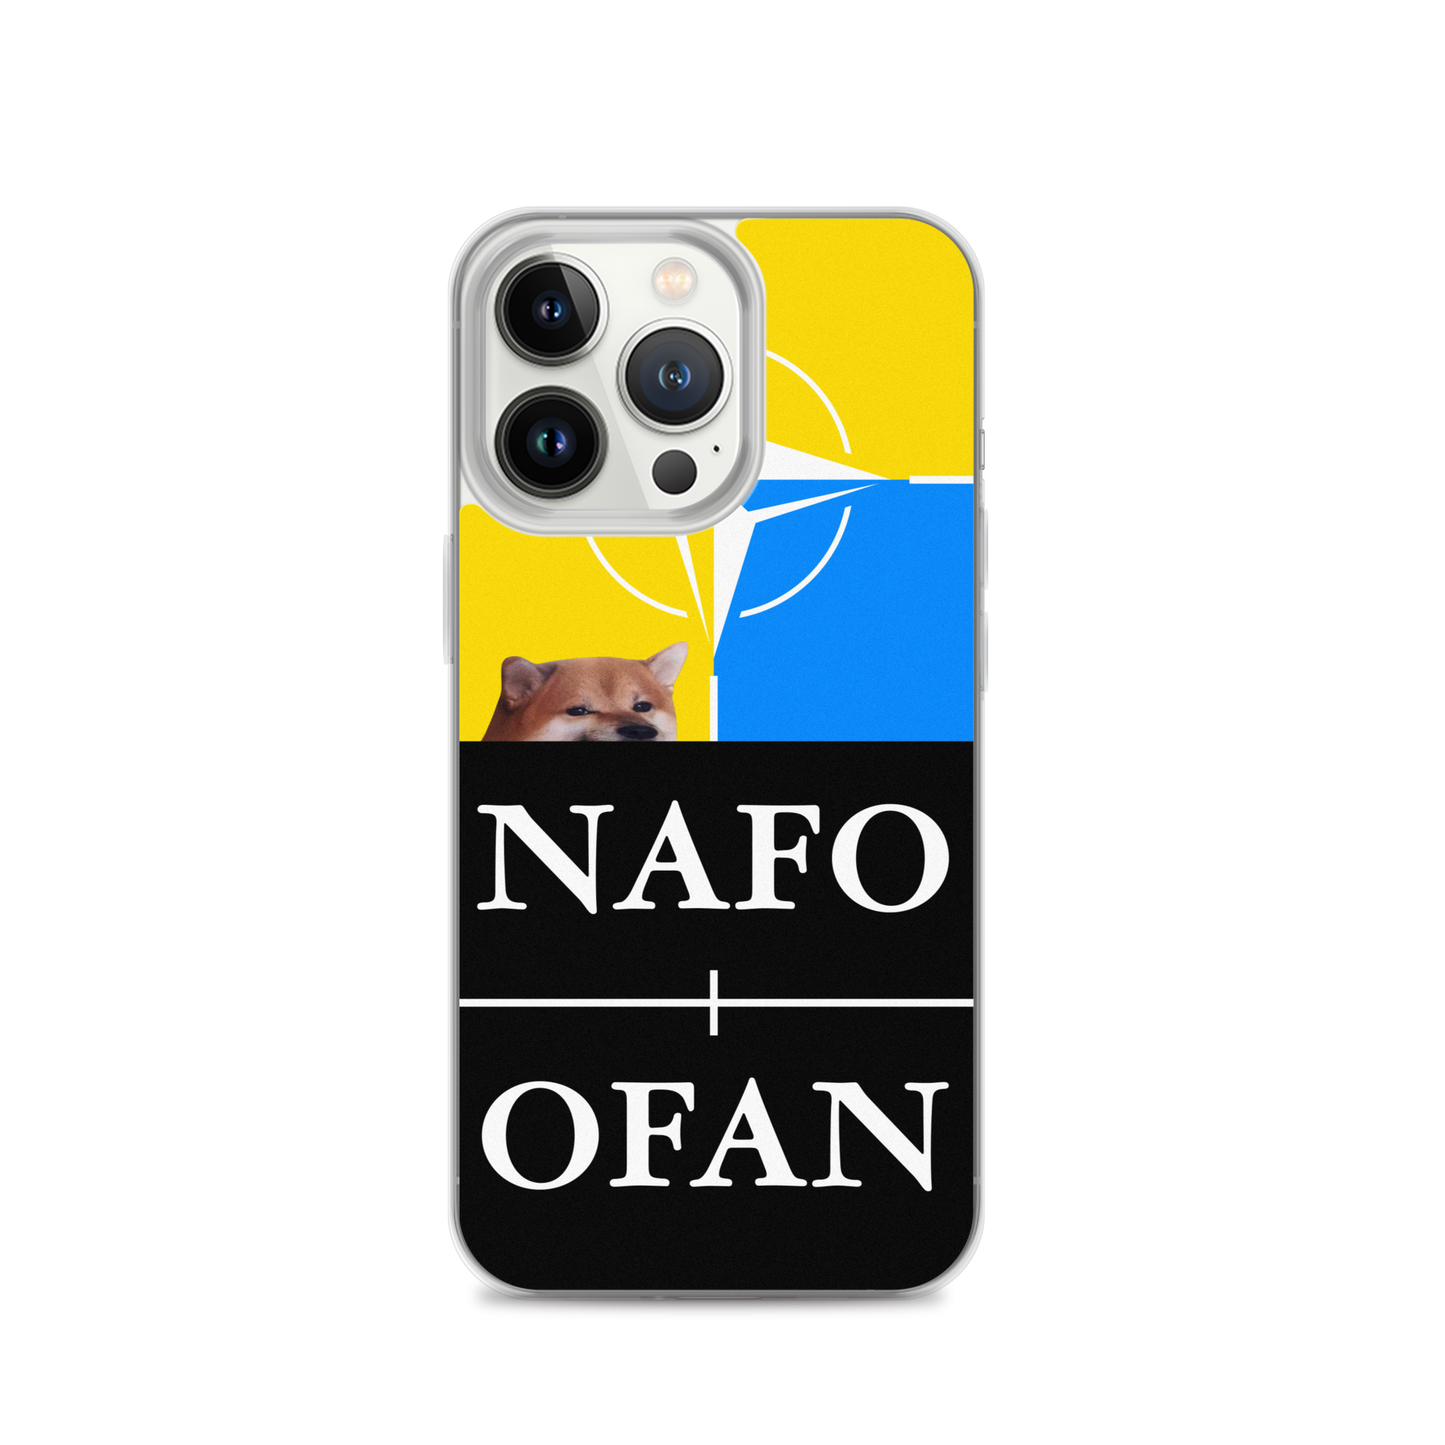 NAFO Blue/Yellow iPhone Case